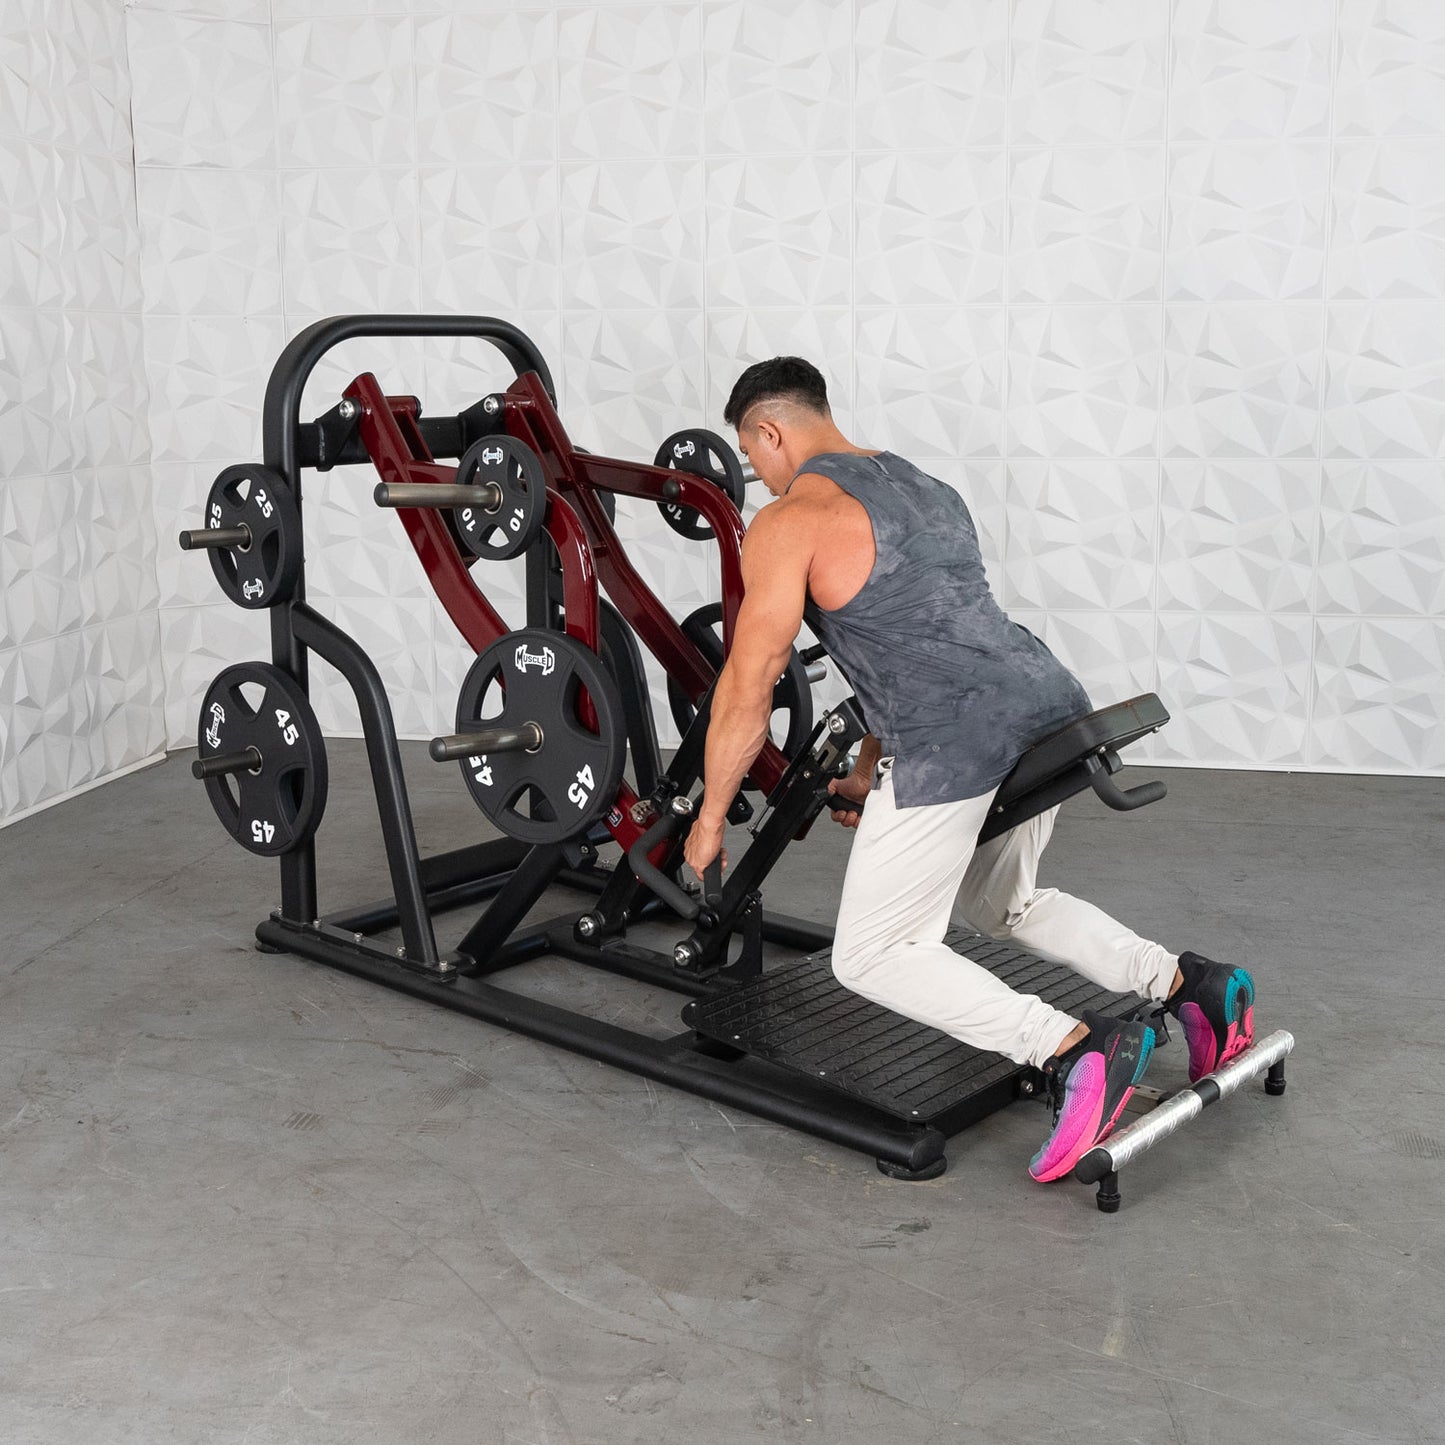 Pro Strength Dynamic Row - Chest Supported